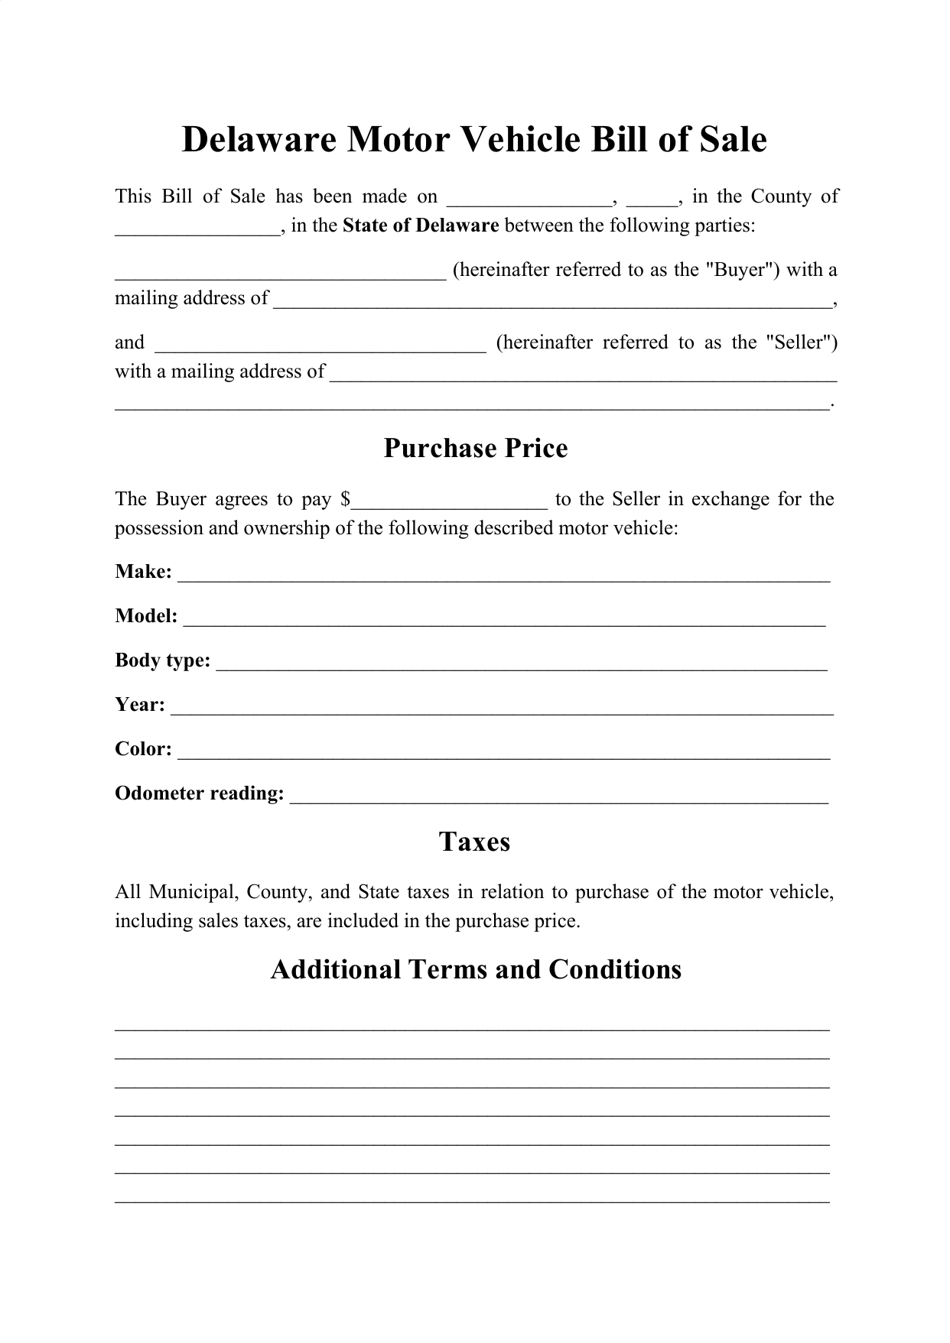 Motor Vehicle Bill of Sale Form - Delaware, Page 1